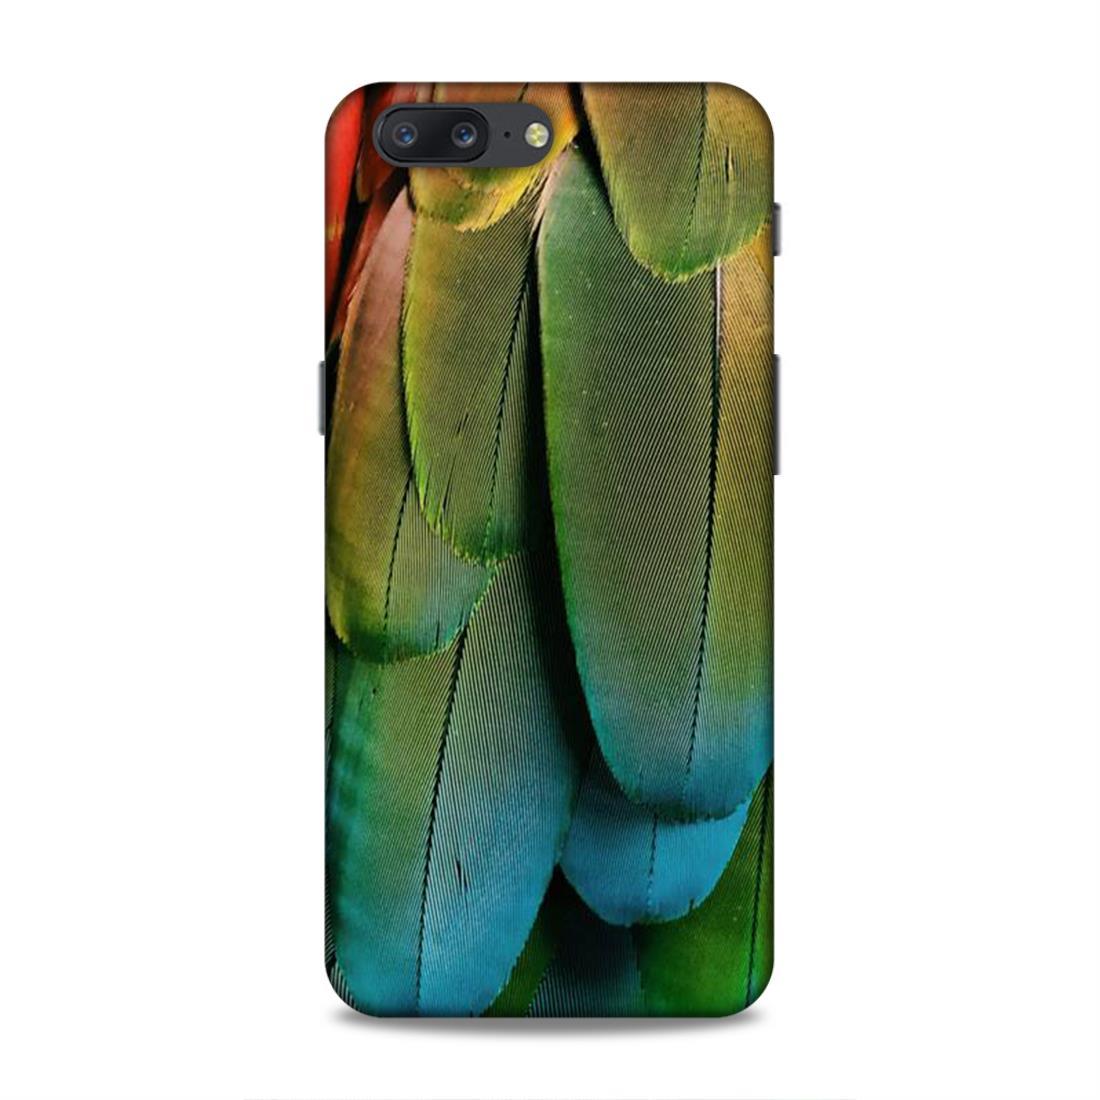 Green Leaves OnePlus 5 Mobile Cover Case